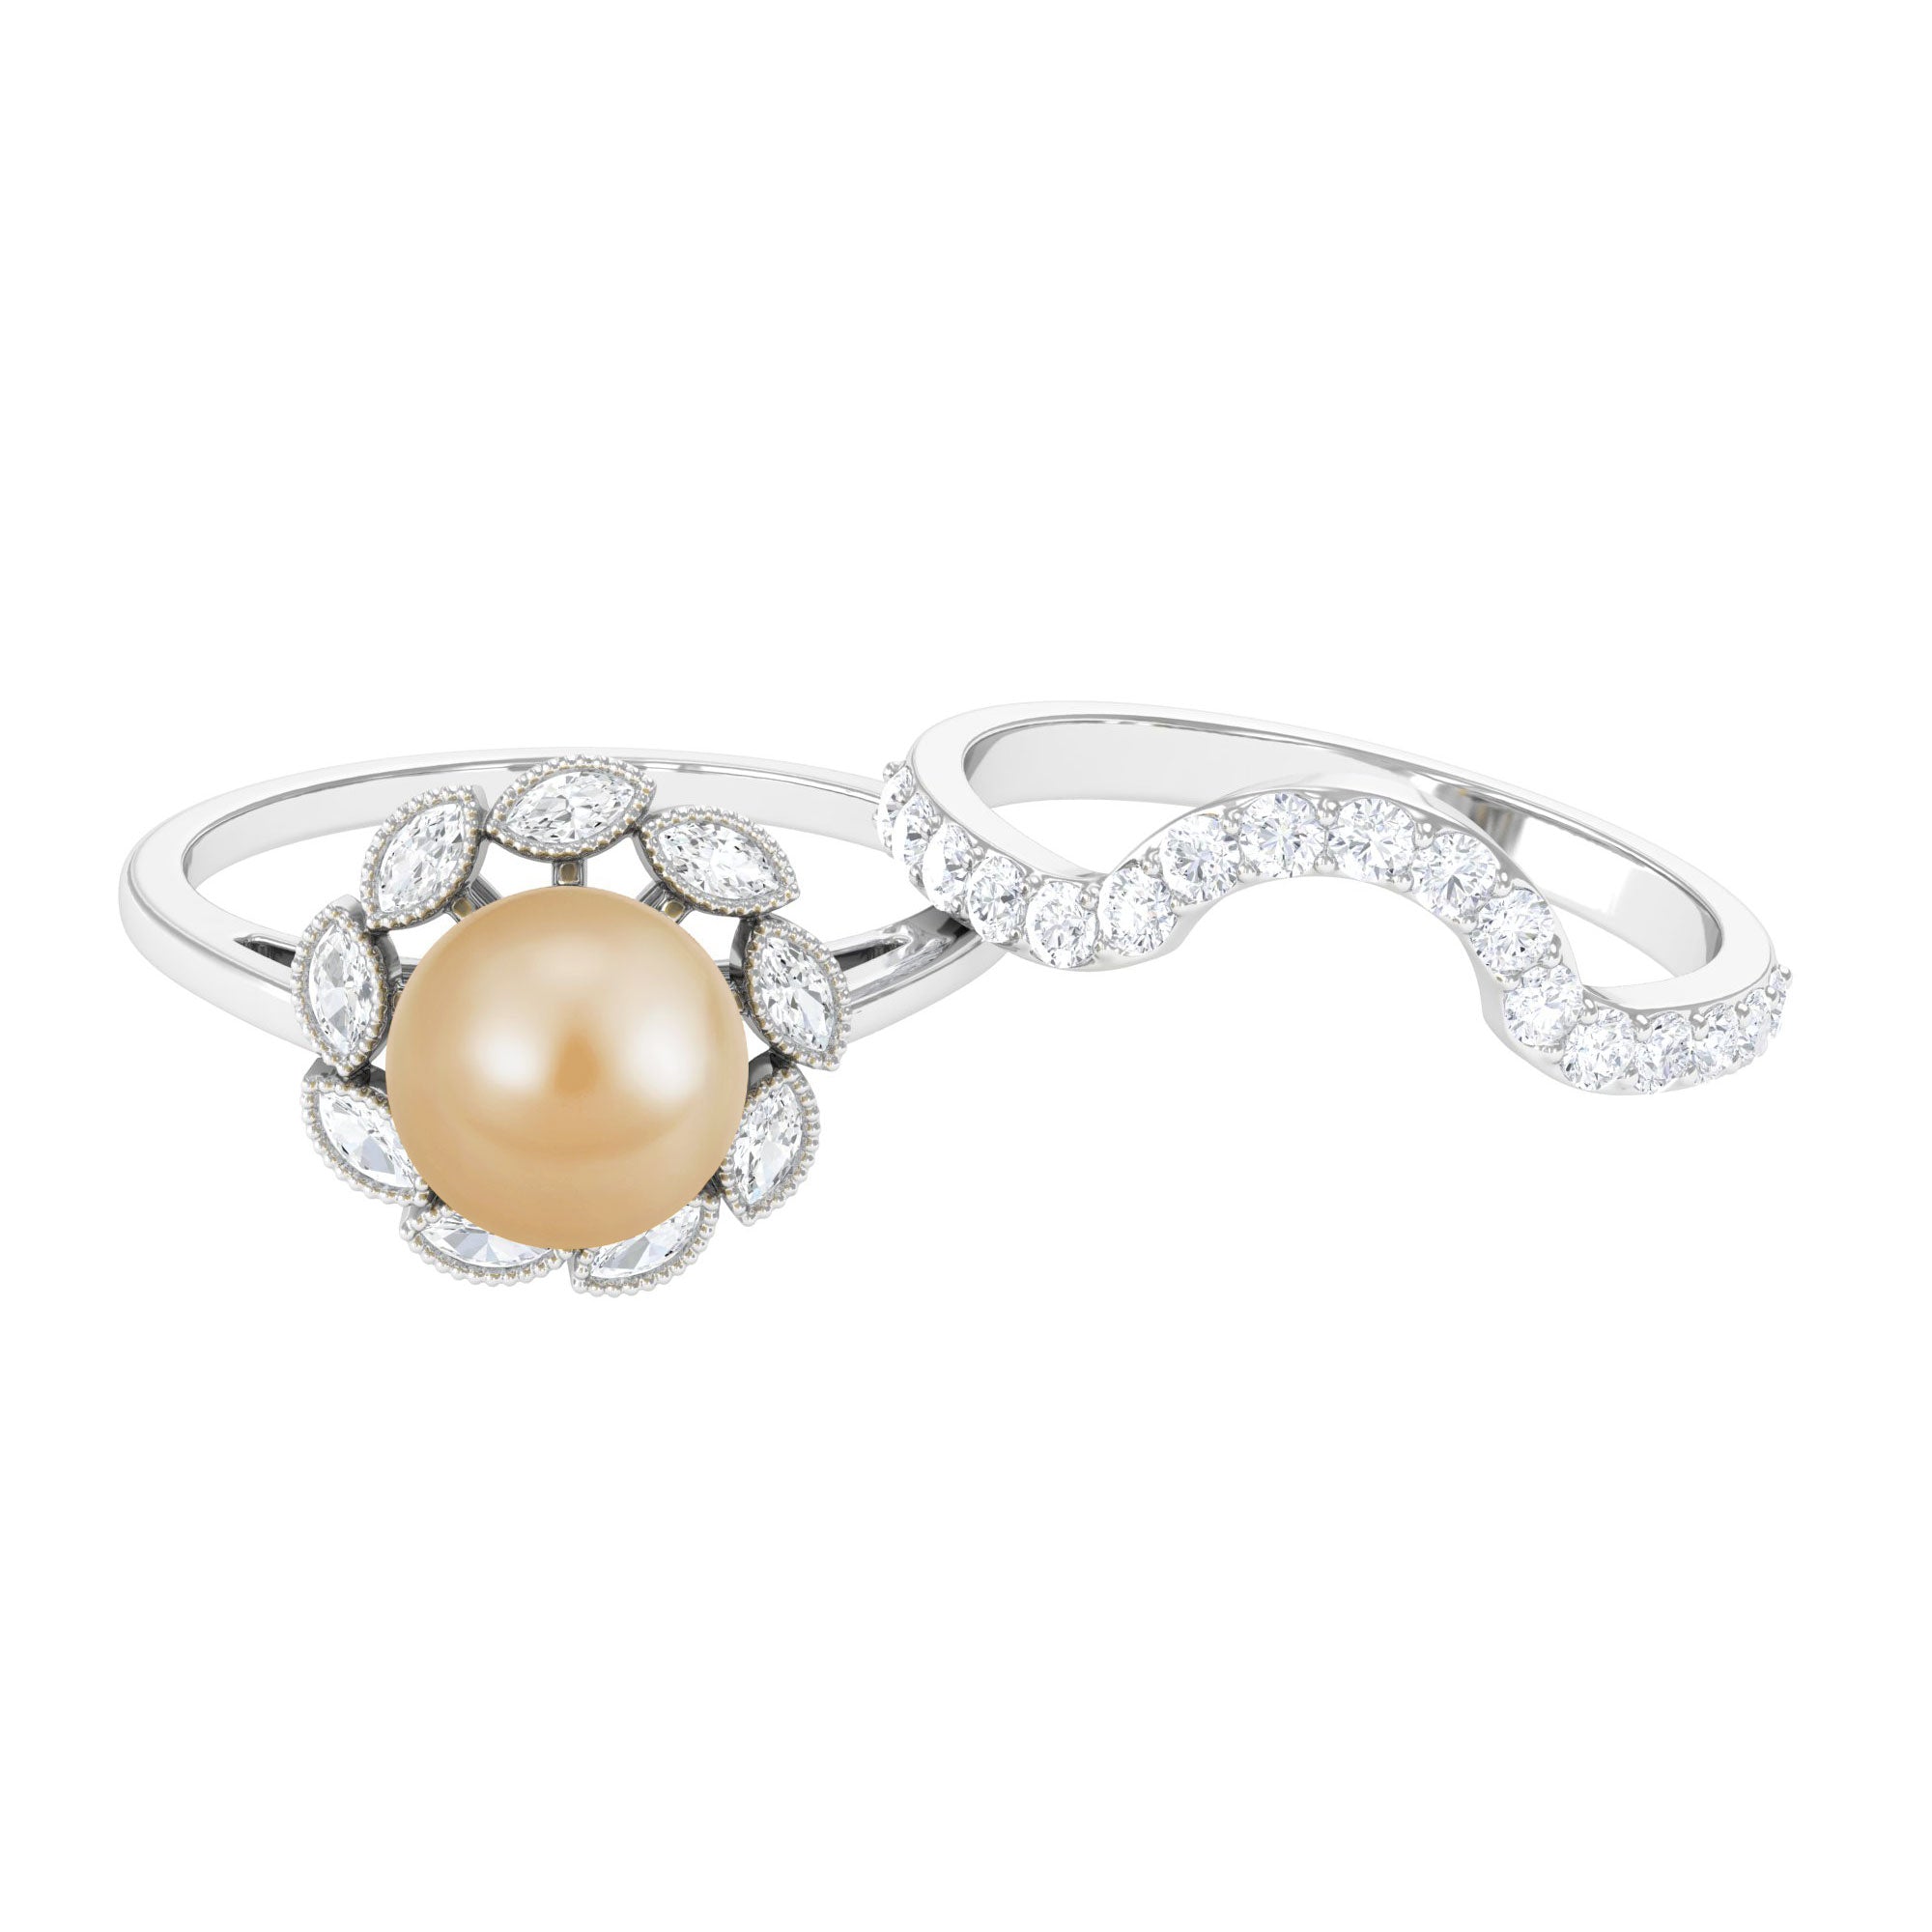 Golden Pearl Floral Bridal Ring Set with Diamond South Sea Pearl-AAAA Quality - Arisha Jewels